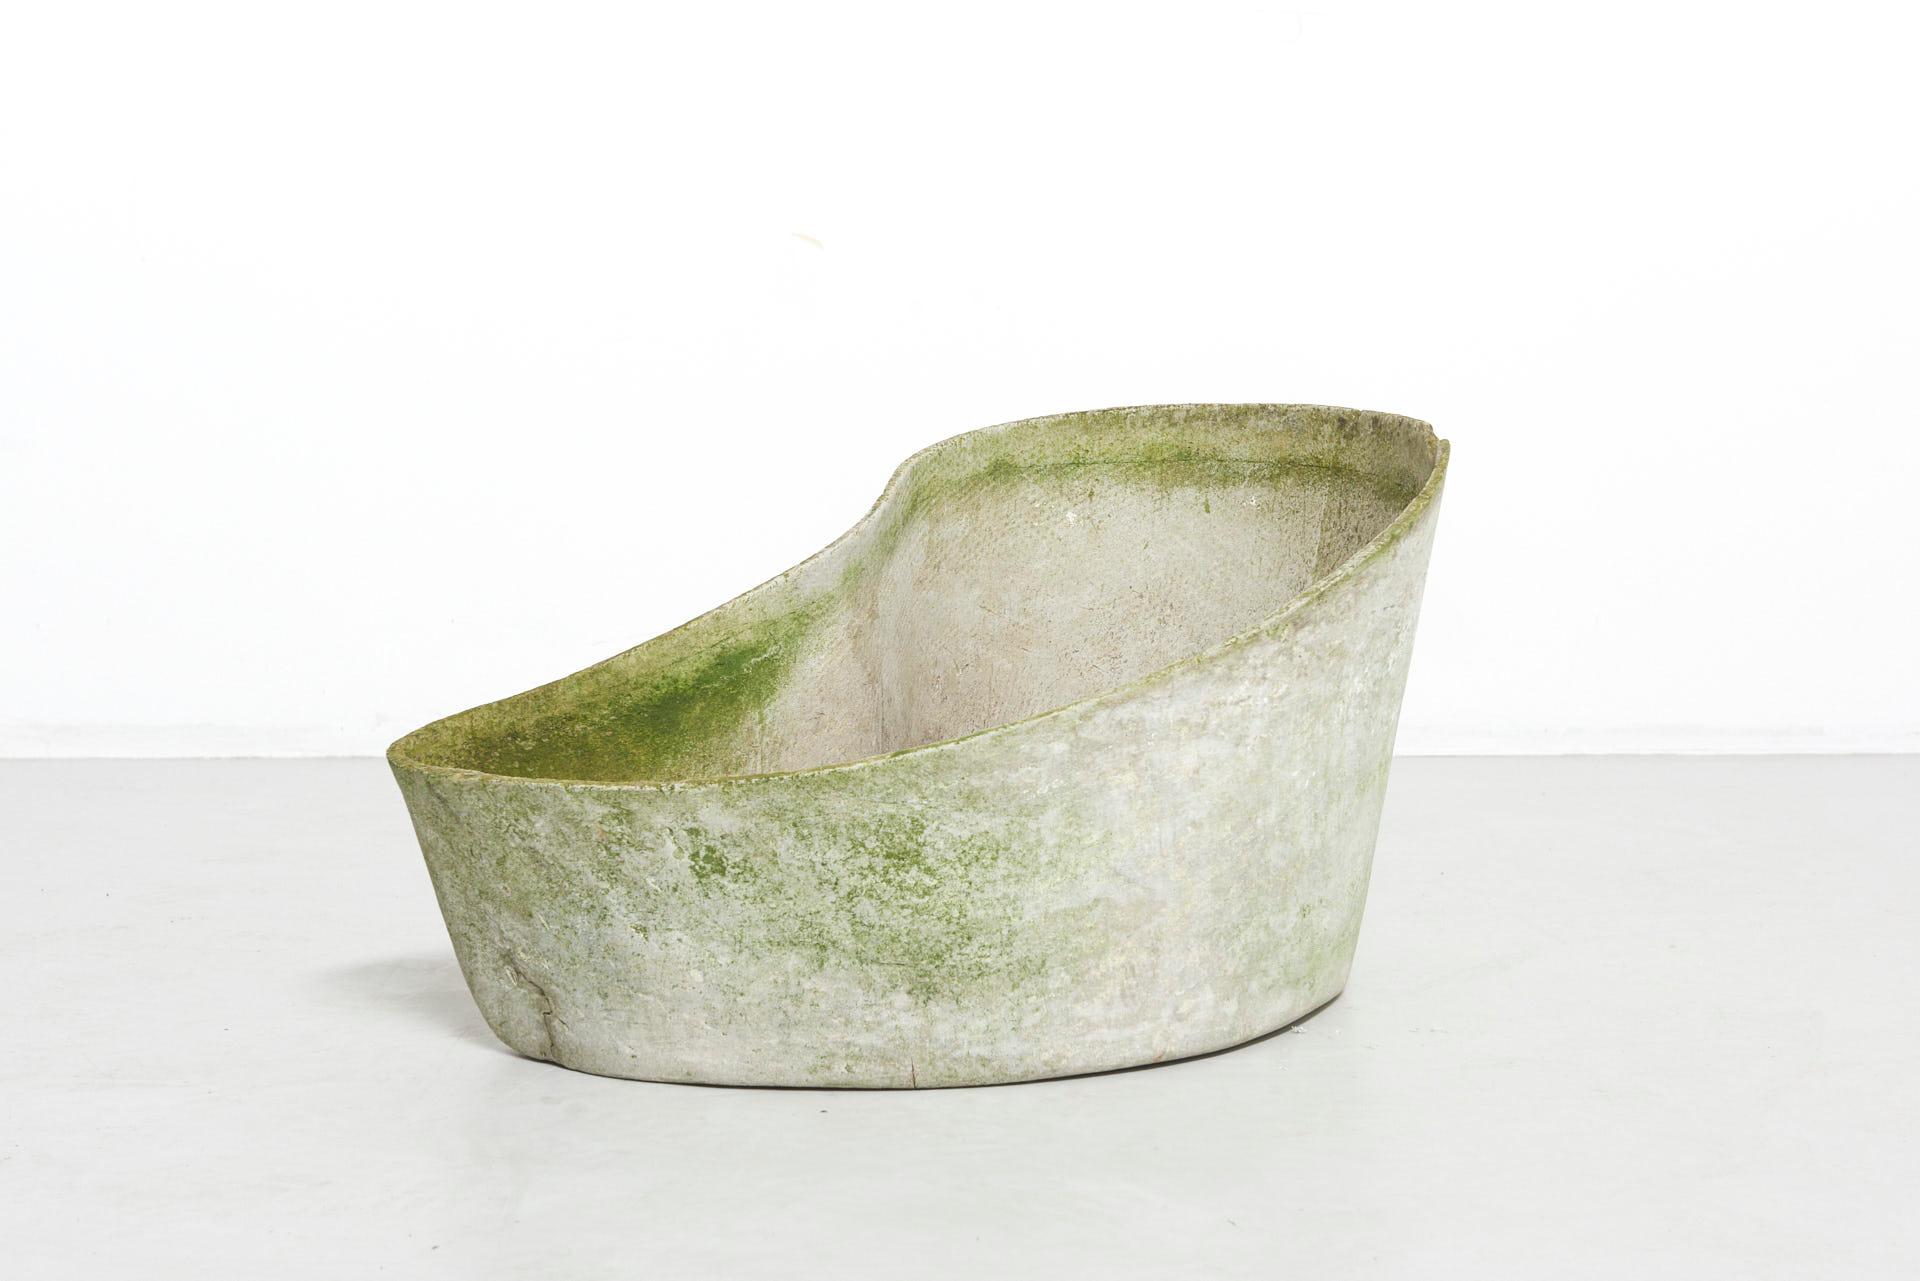 Planter, design by Willy Guhl. Produced by Eternit SA in Switzerland.